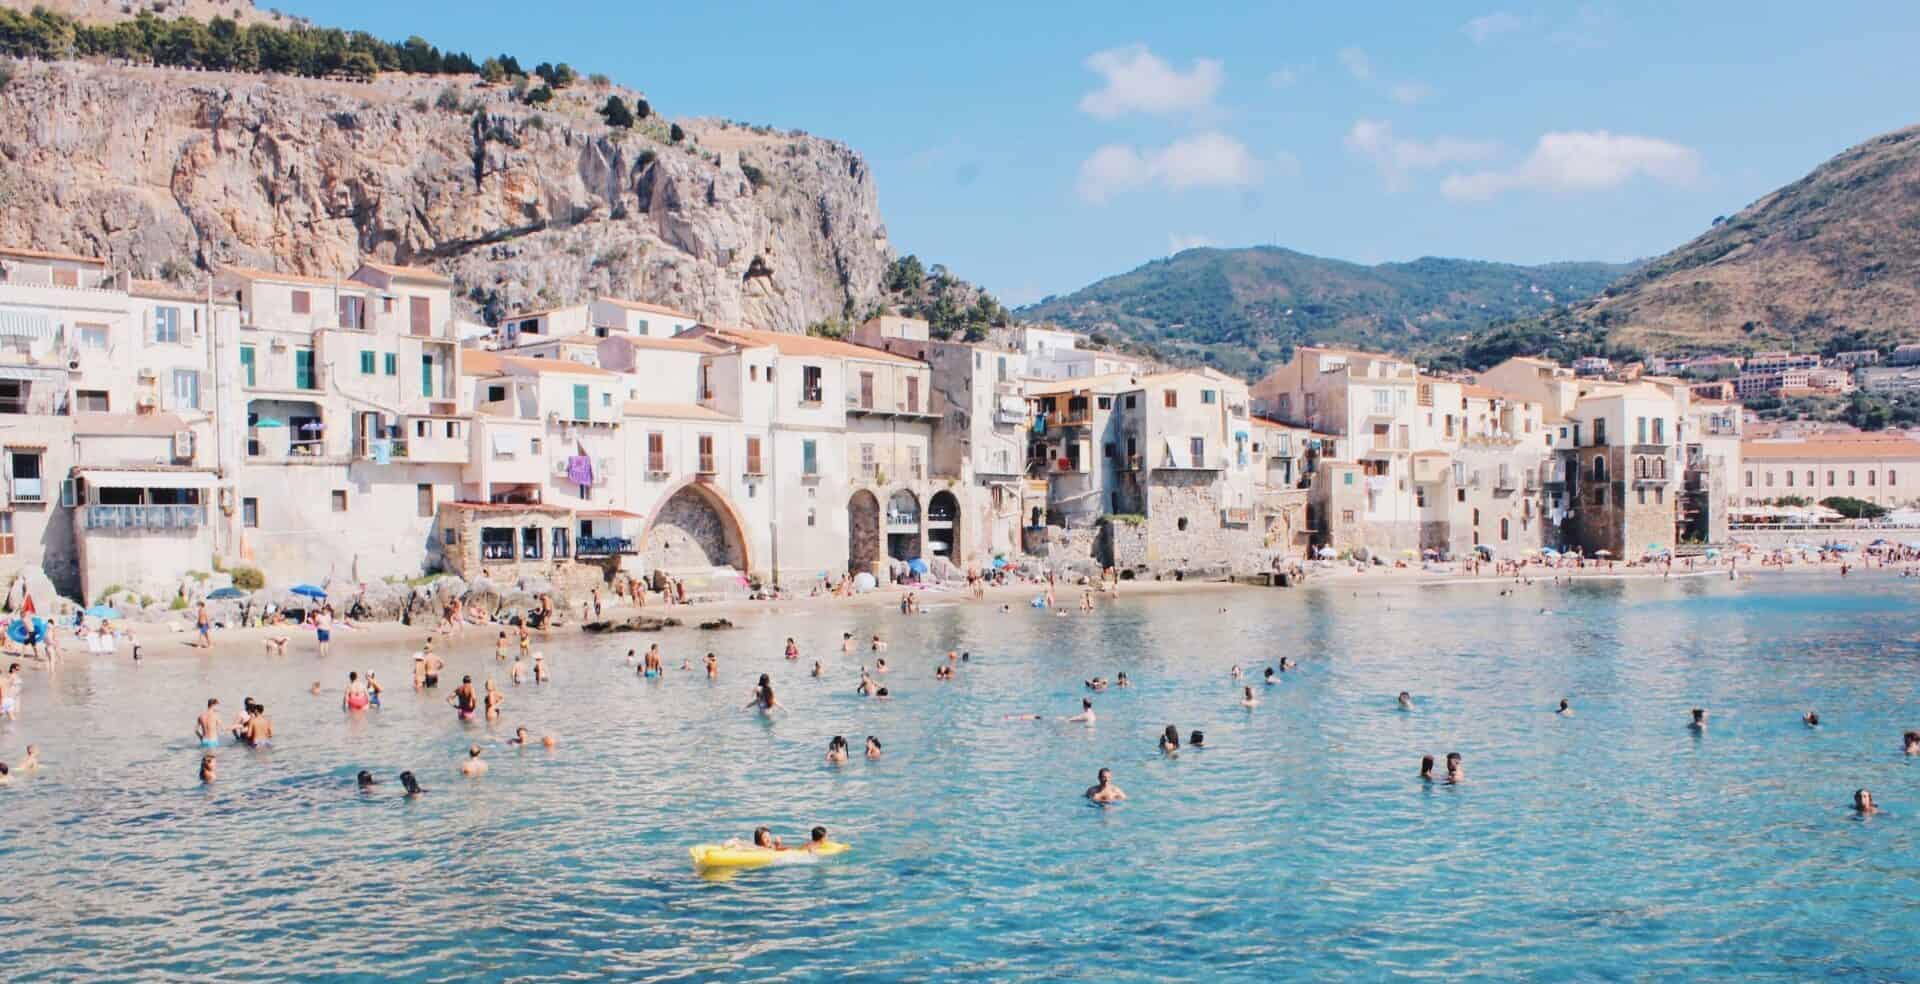 Tourists swimming in clear waters of the Mediterranean Sea in Sicily